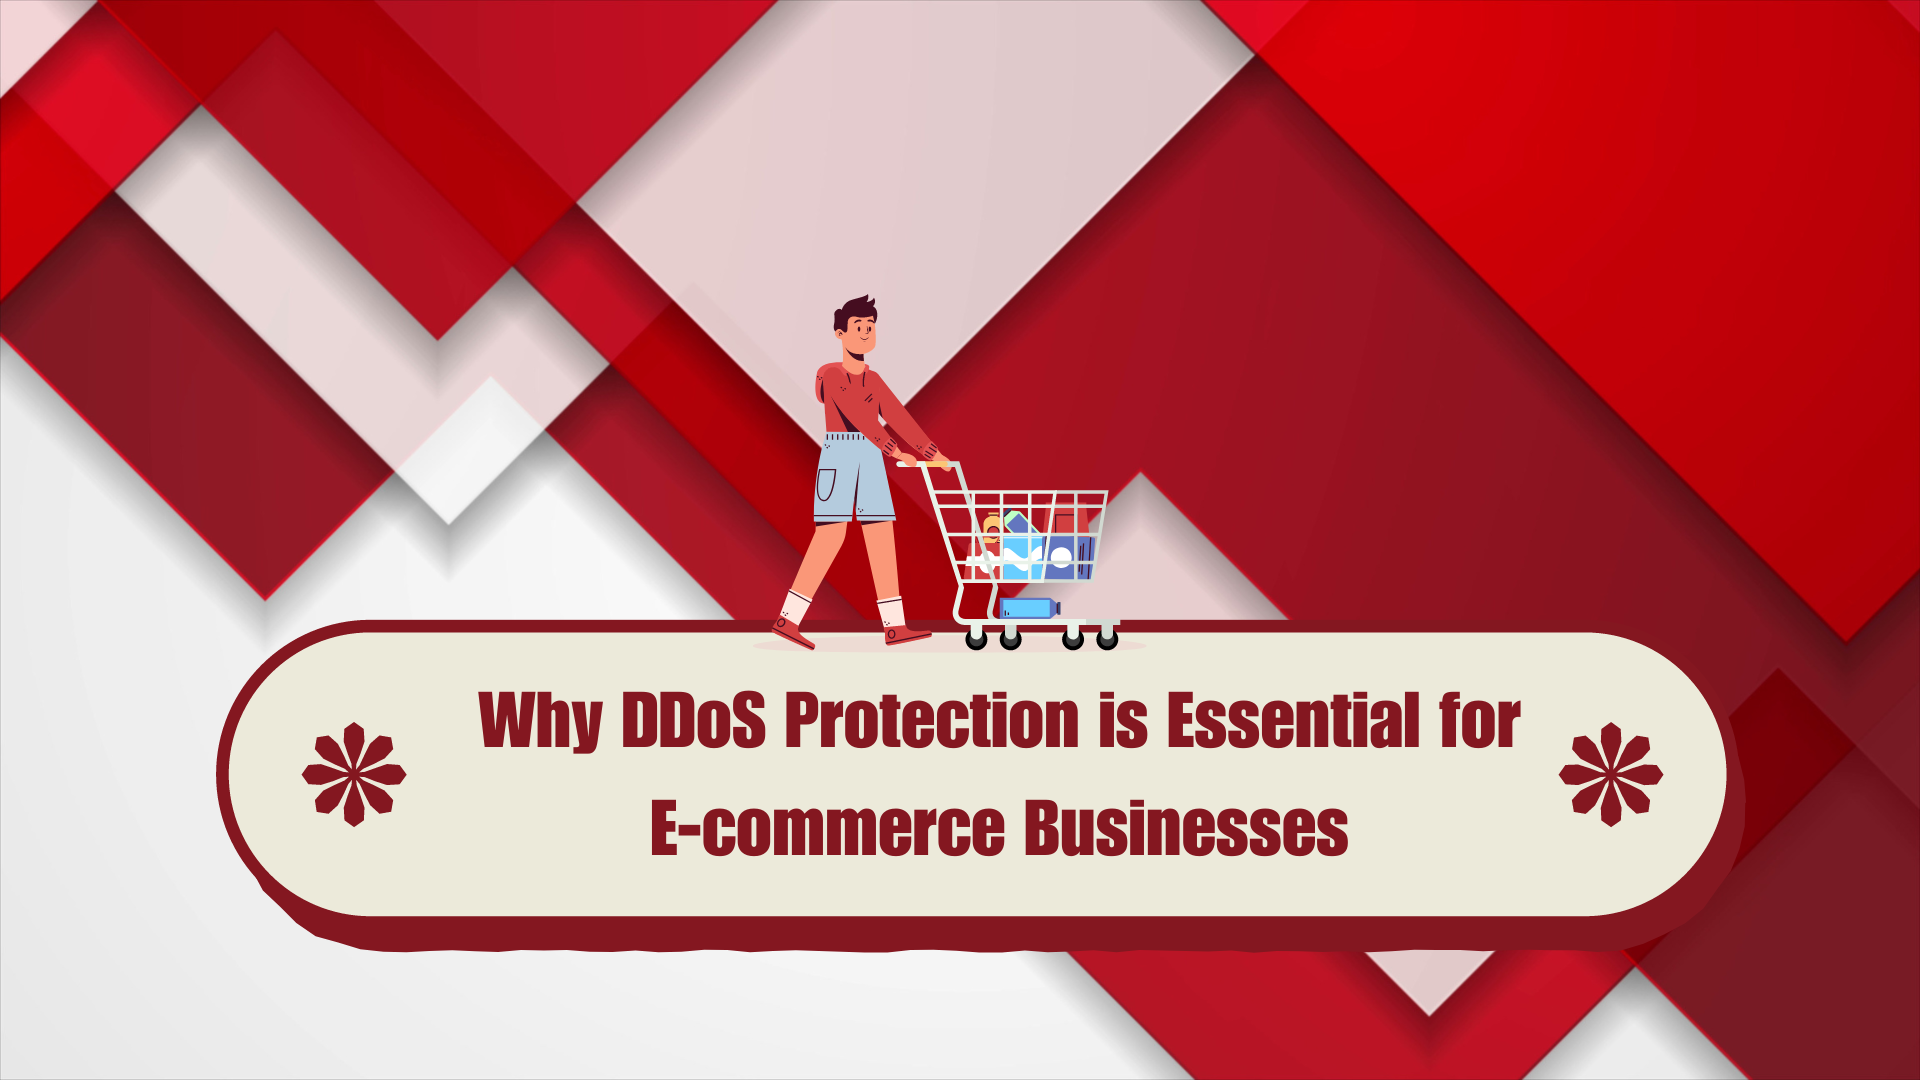 Why DDoS Protection is Essential for E-commerce Businesses